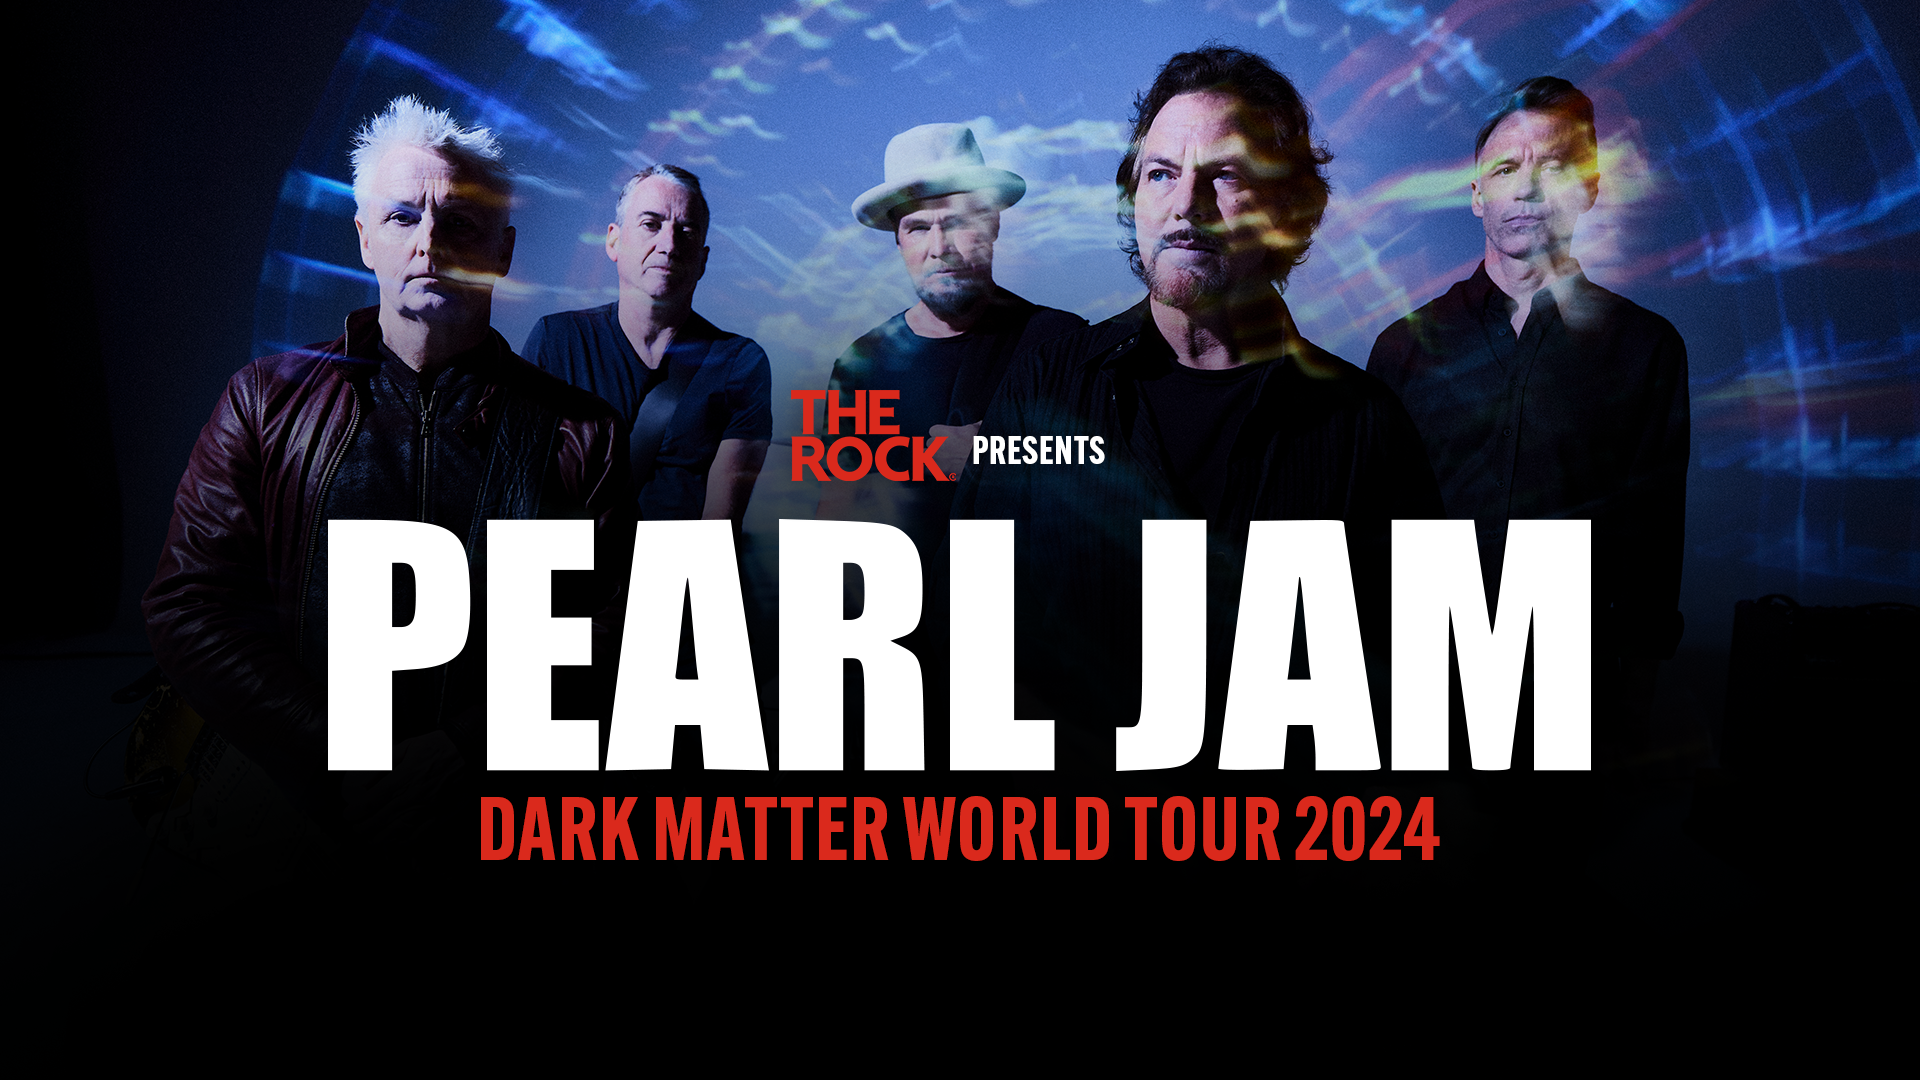 https://www.theedge.co.nz/content/dam/radio-common/national-events/2024/02/ROK-PEARL-JAM-1920x1080.png